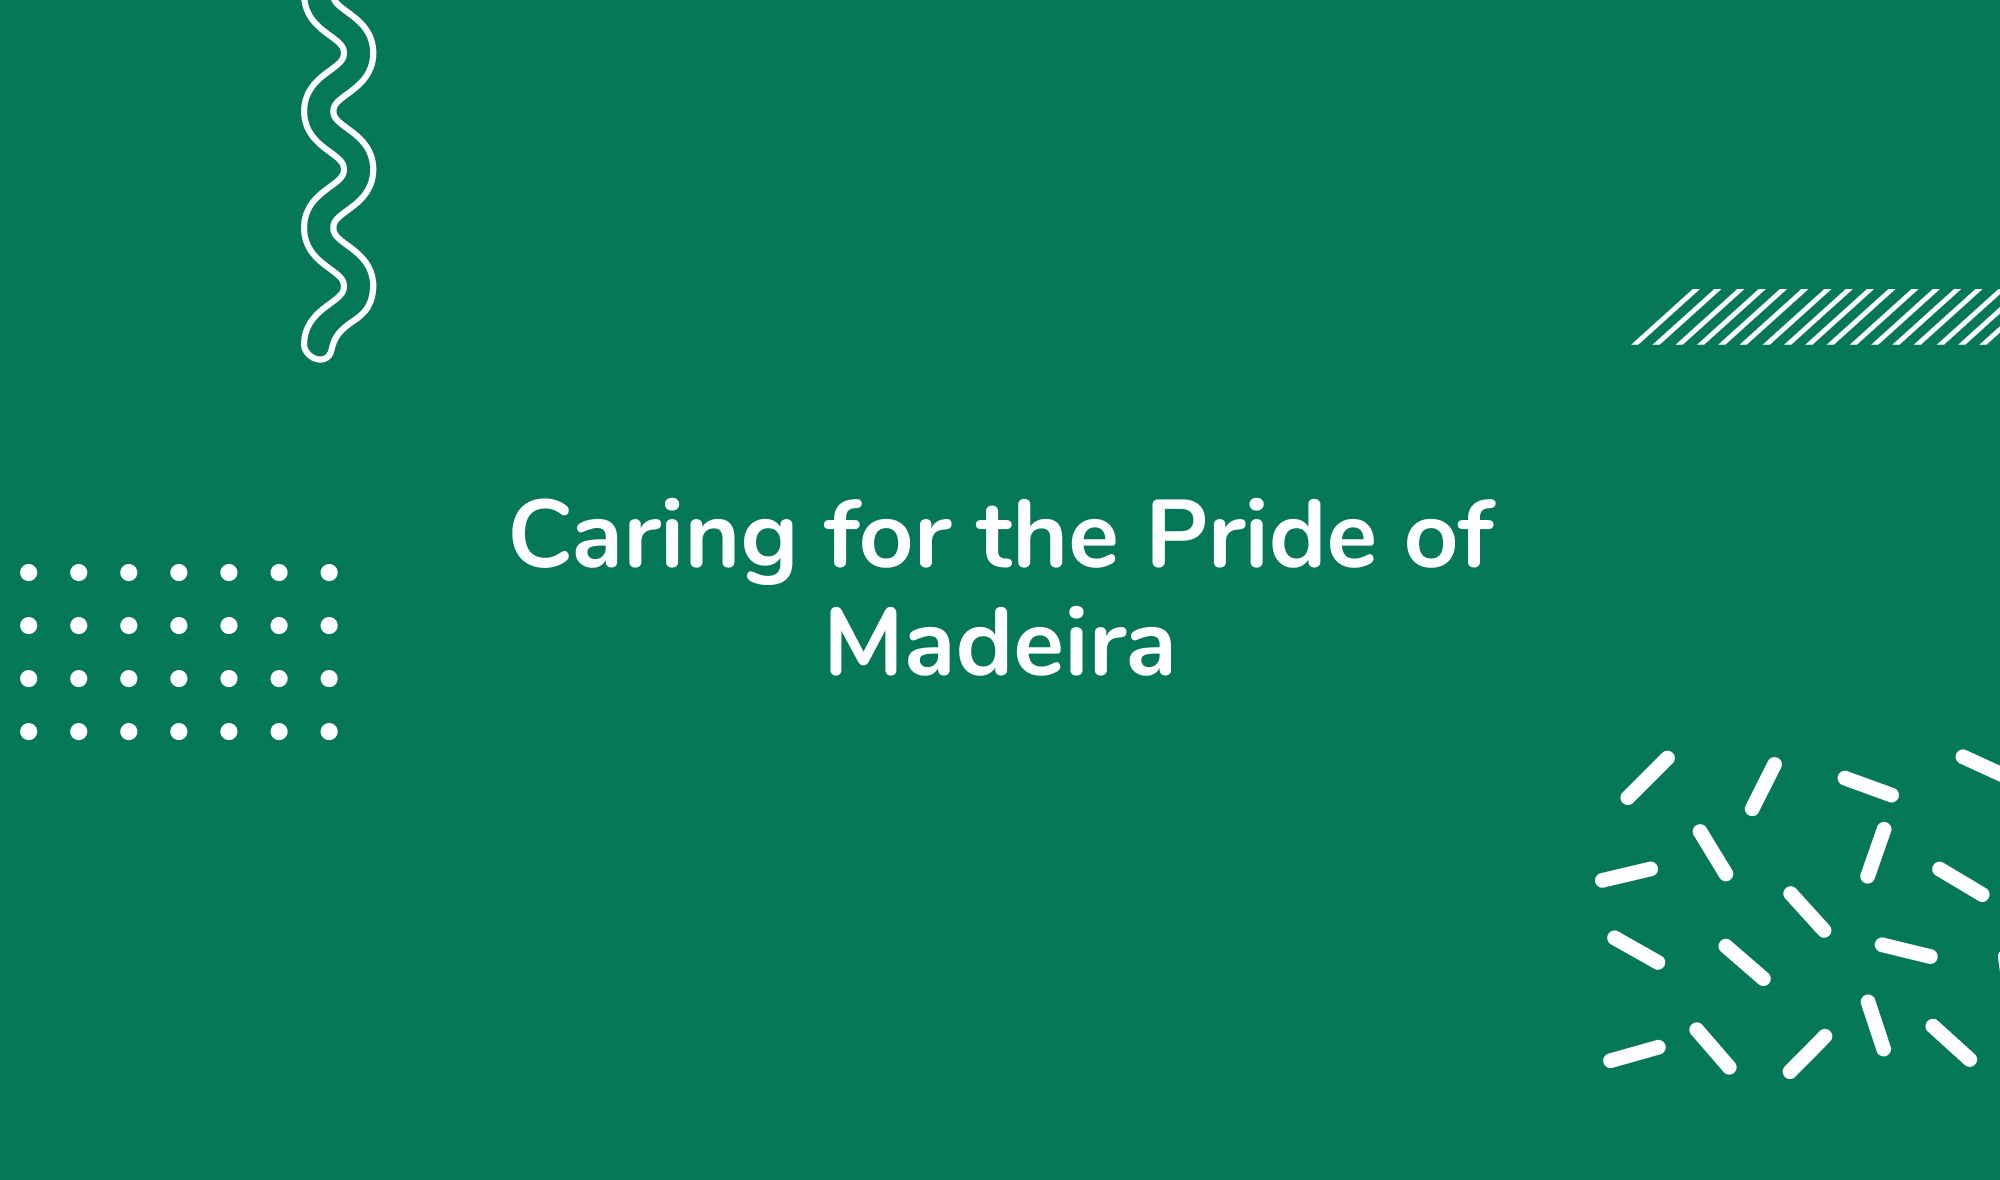 Caring for the Pride of Madeira